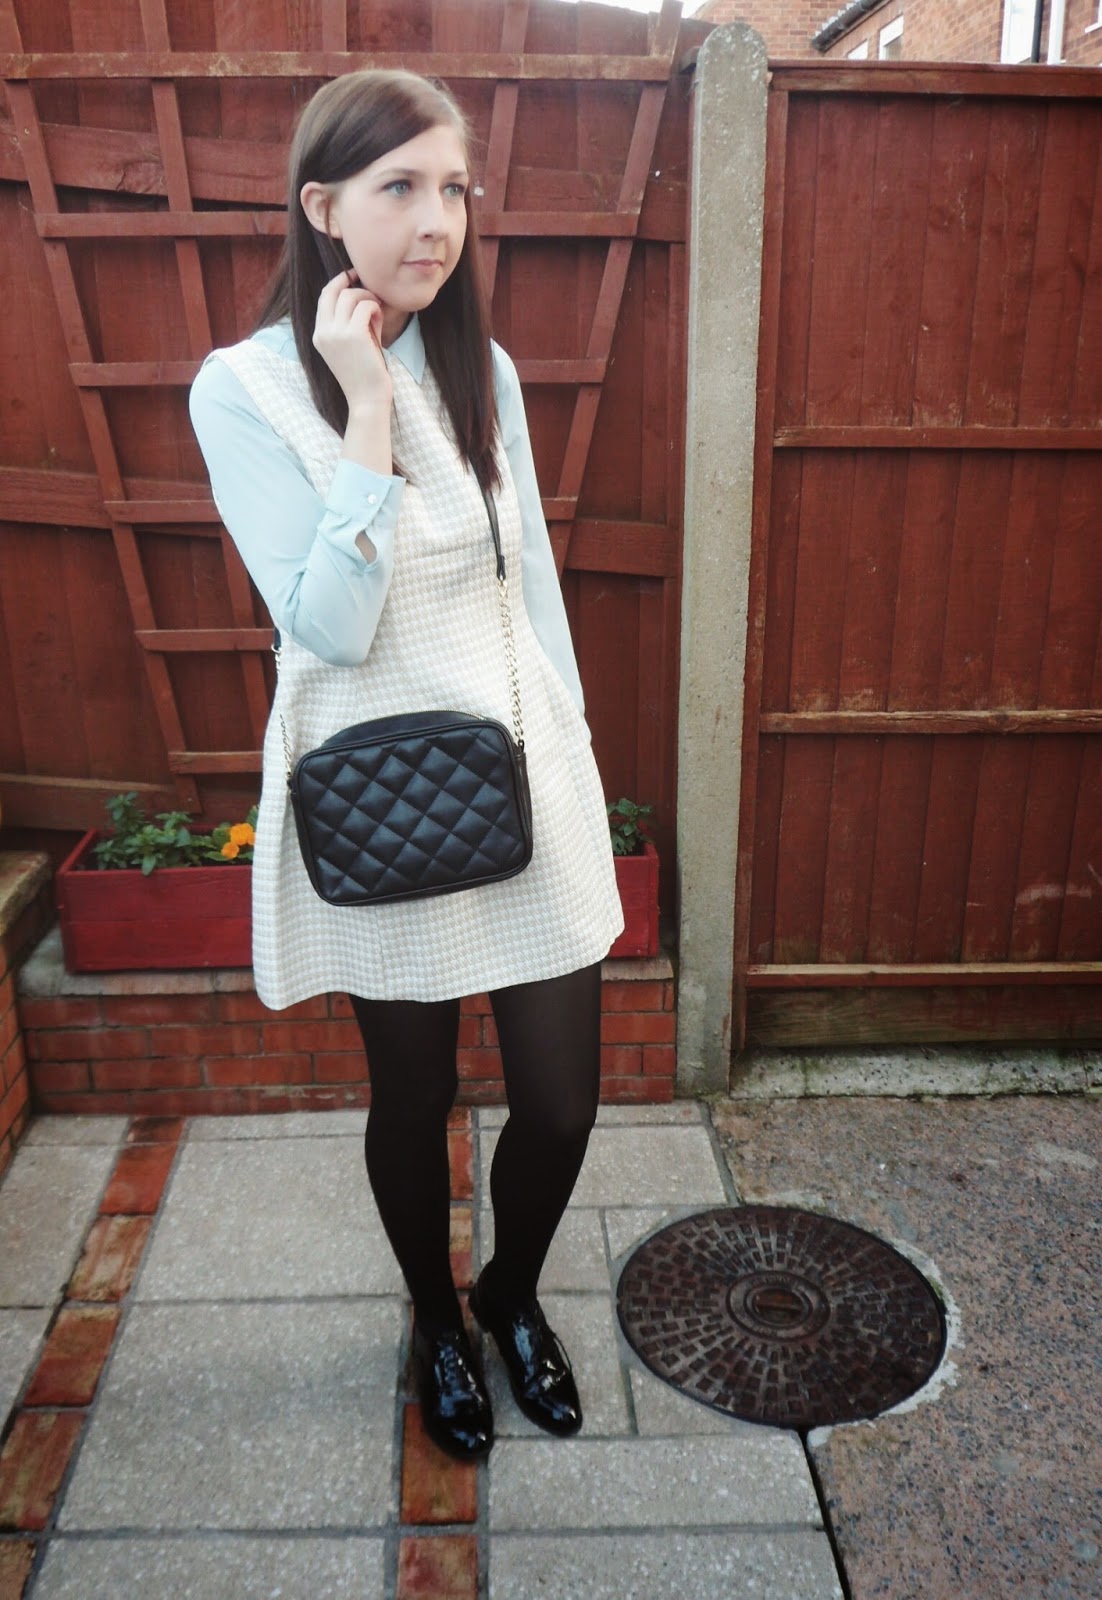 asseenonme, asos, primark, fuschiawhite, wiw, whatimwearing, ootd, outfitoftheday, lotd, lookoftheday, fbloggers, fashion, fashionbloggers, chanel, fblogger, brogues, gingham, fashionblogger, winterfashion, pastels